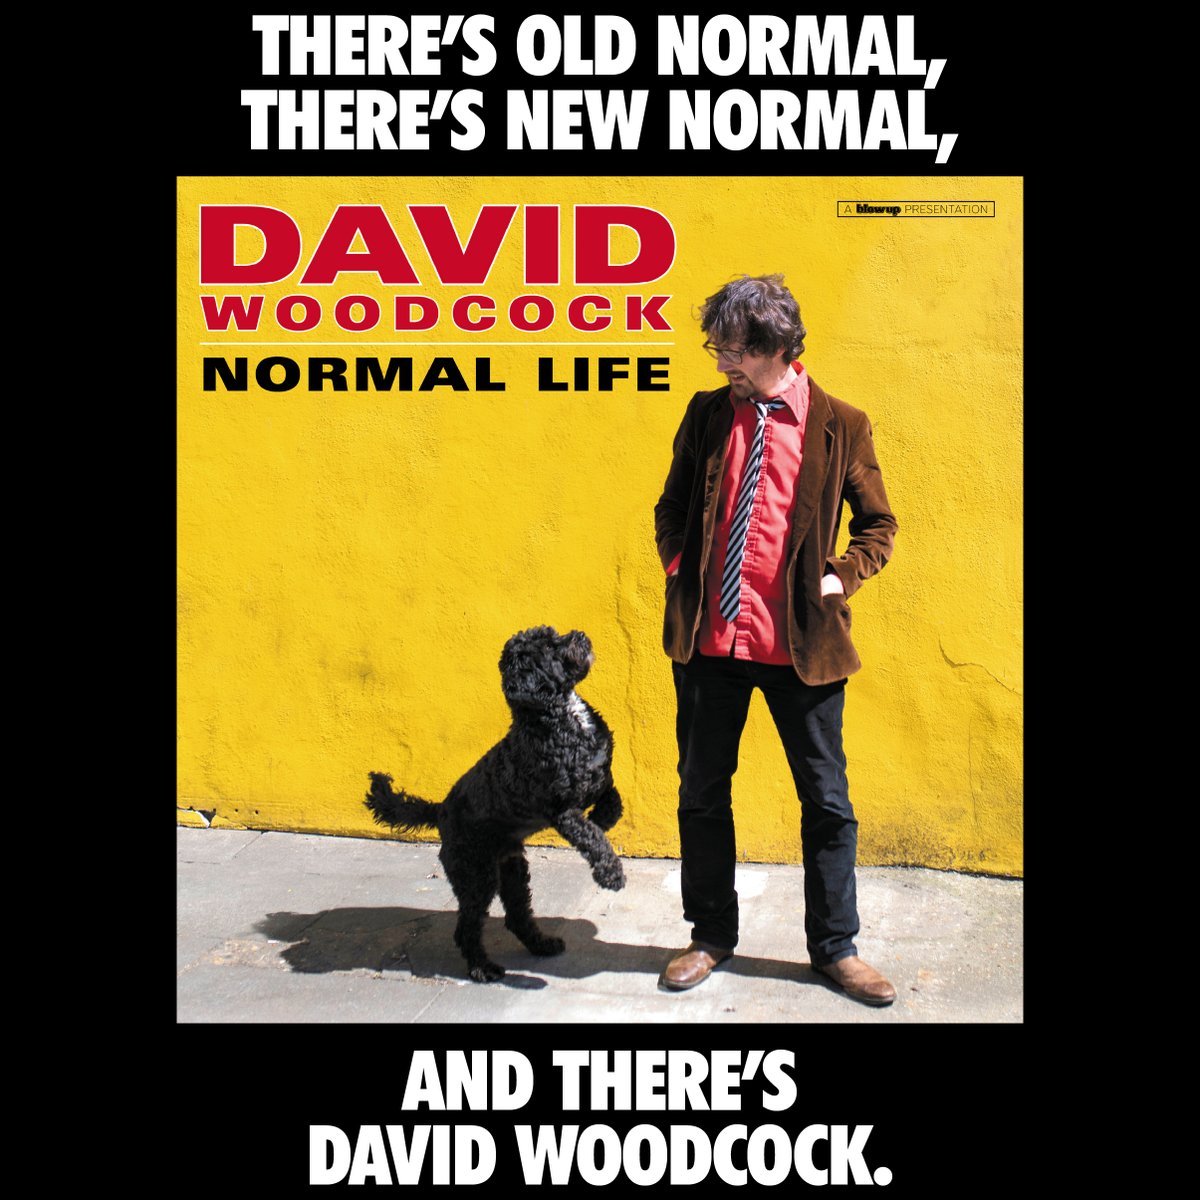 #OldNormal #NewNormal @DWoodcock_Music #NormalLife video will premier Thurs 4th June at 7pm via @BlowUpRecords You Tube channel. #TuneIn